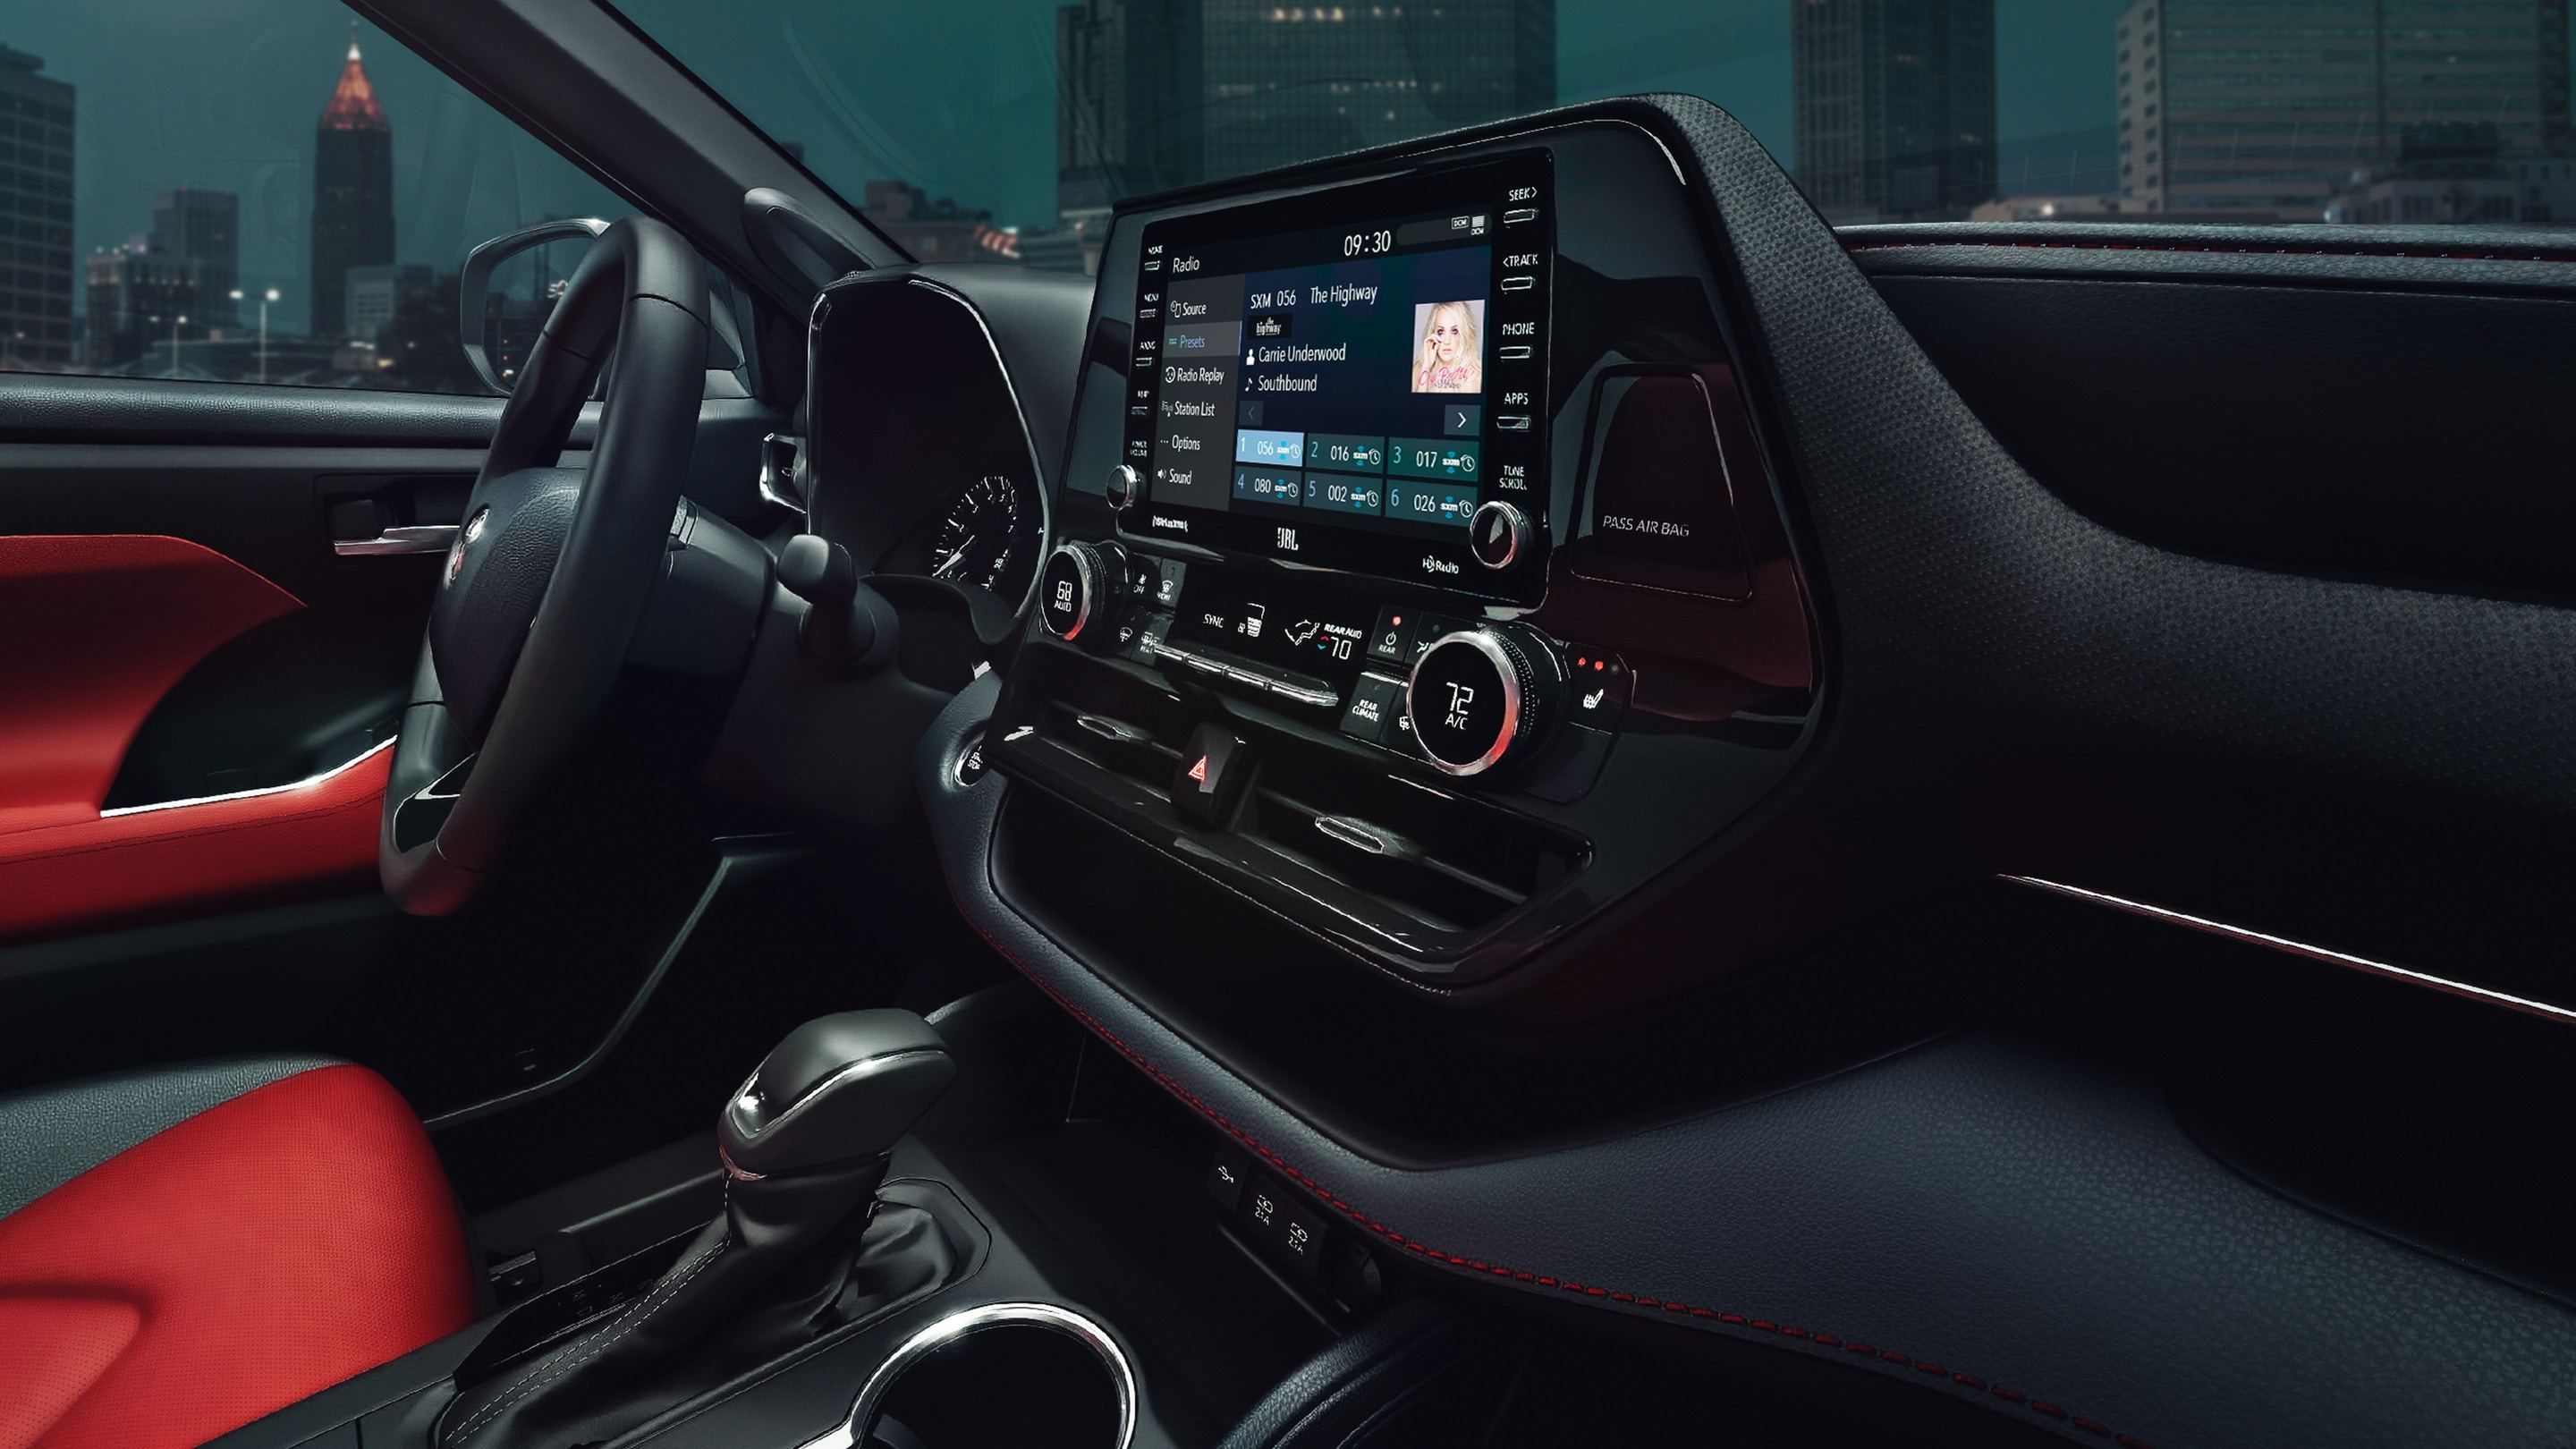 2021 Toyota Highlander XSE interior shown in Cockpit Red leather